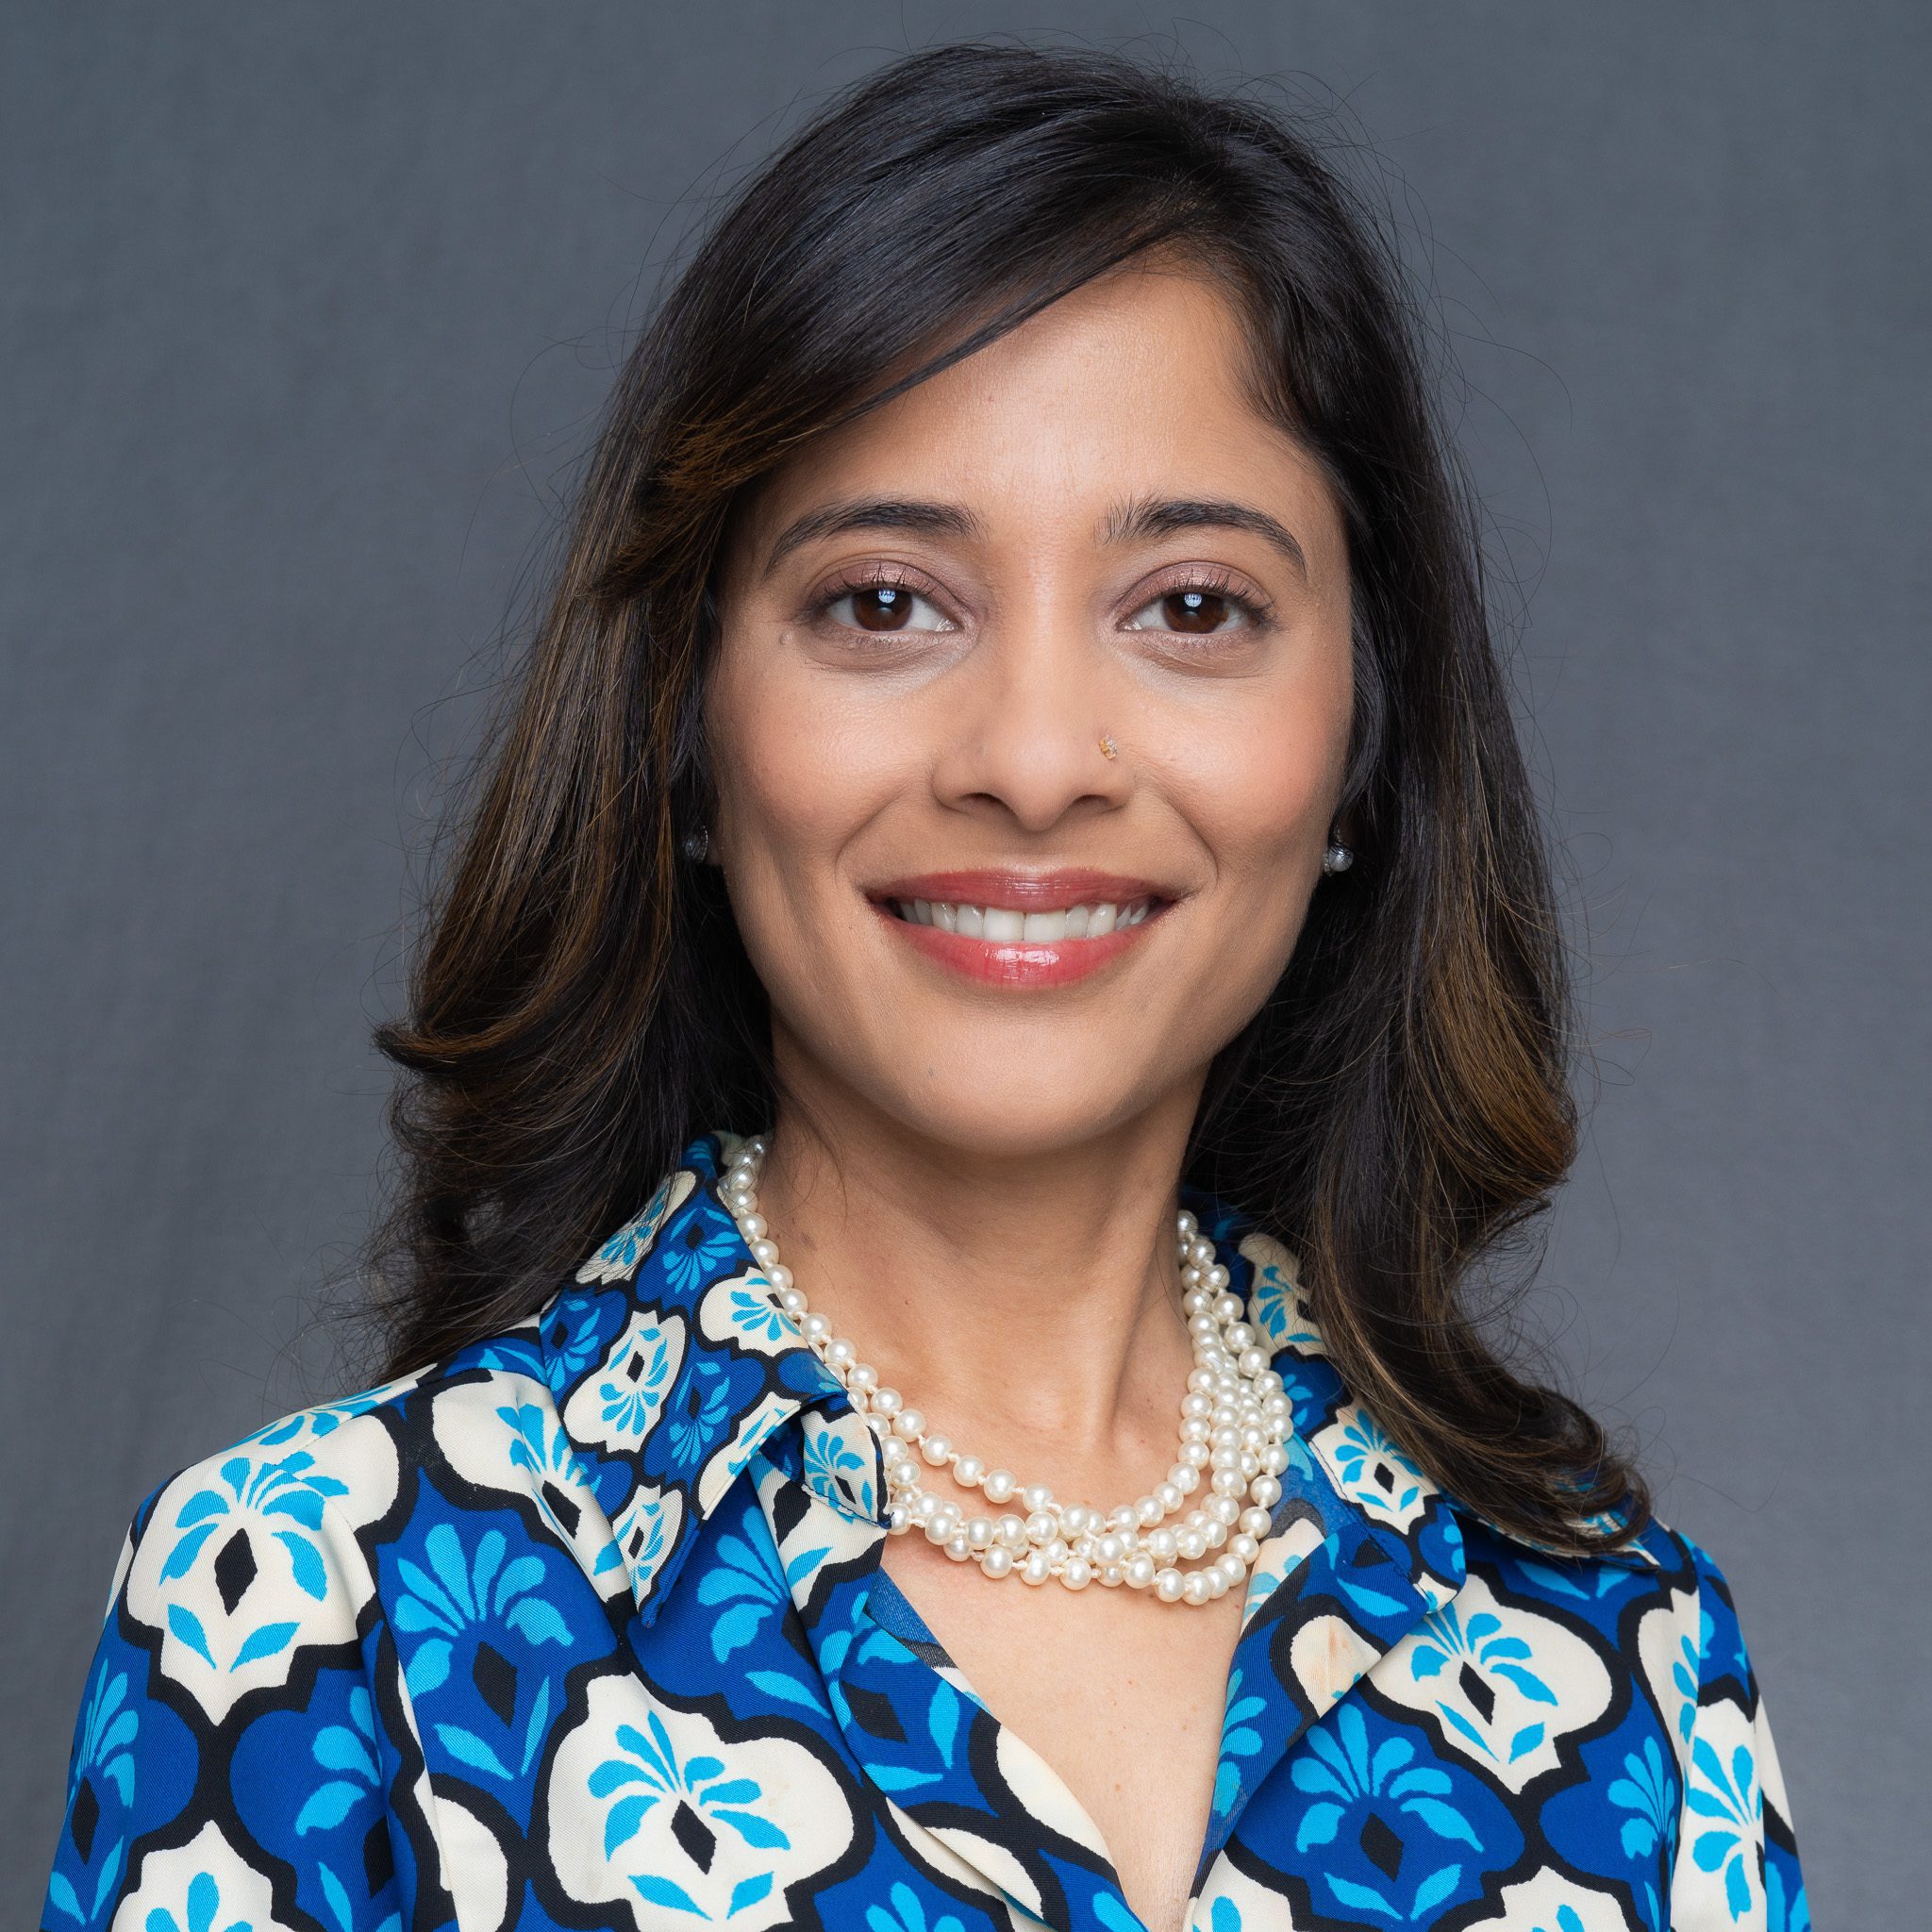 a professional Indian woman with long dark hair and brown eyes wearing a blue and white top and having her corporate headshot taken Georgie Greene Photography